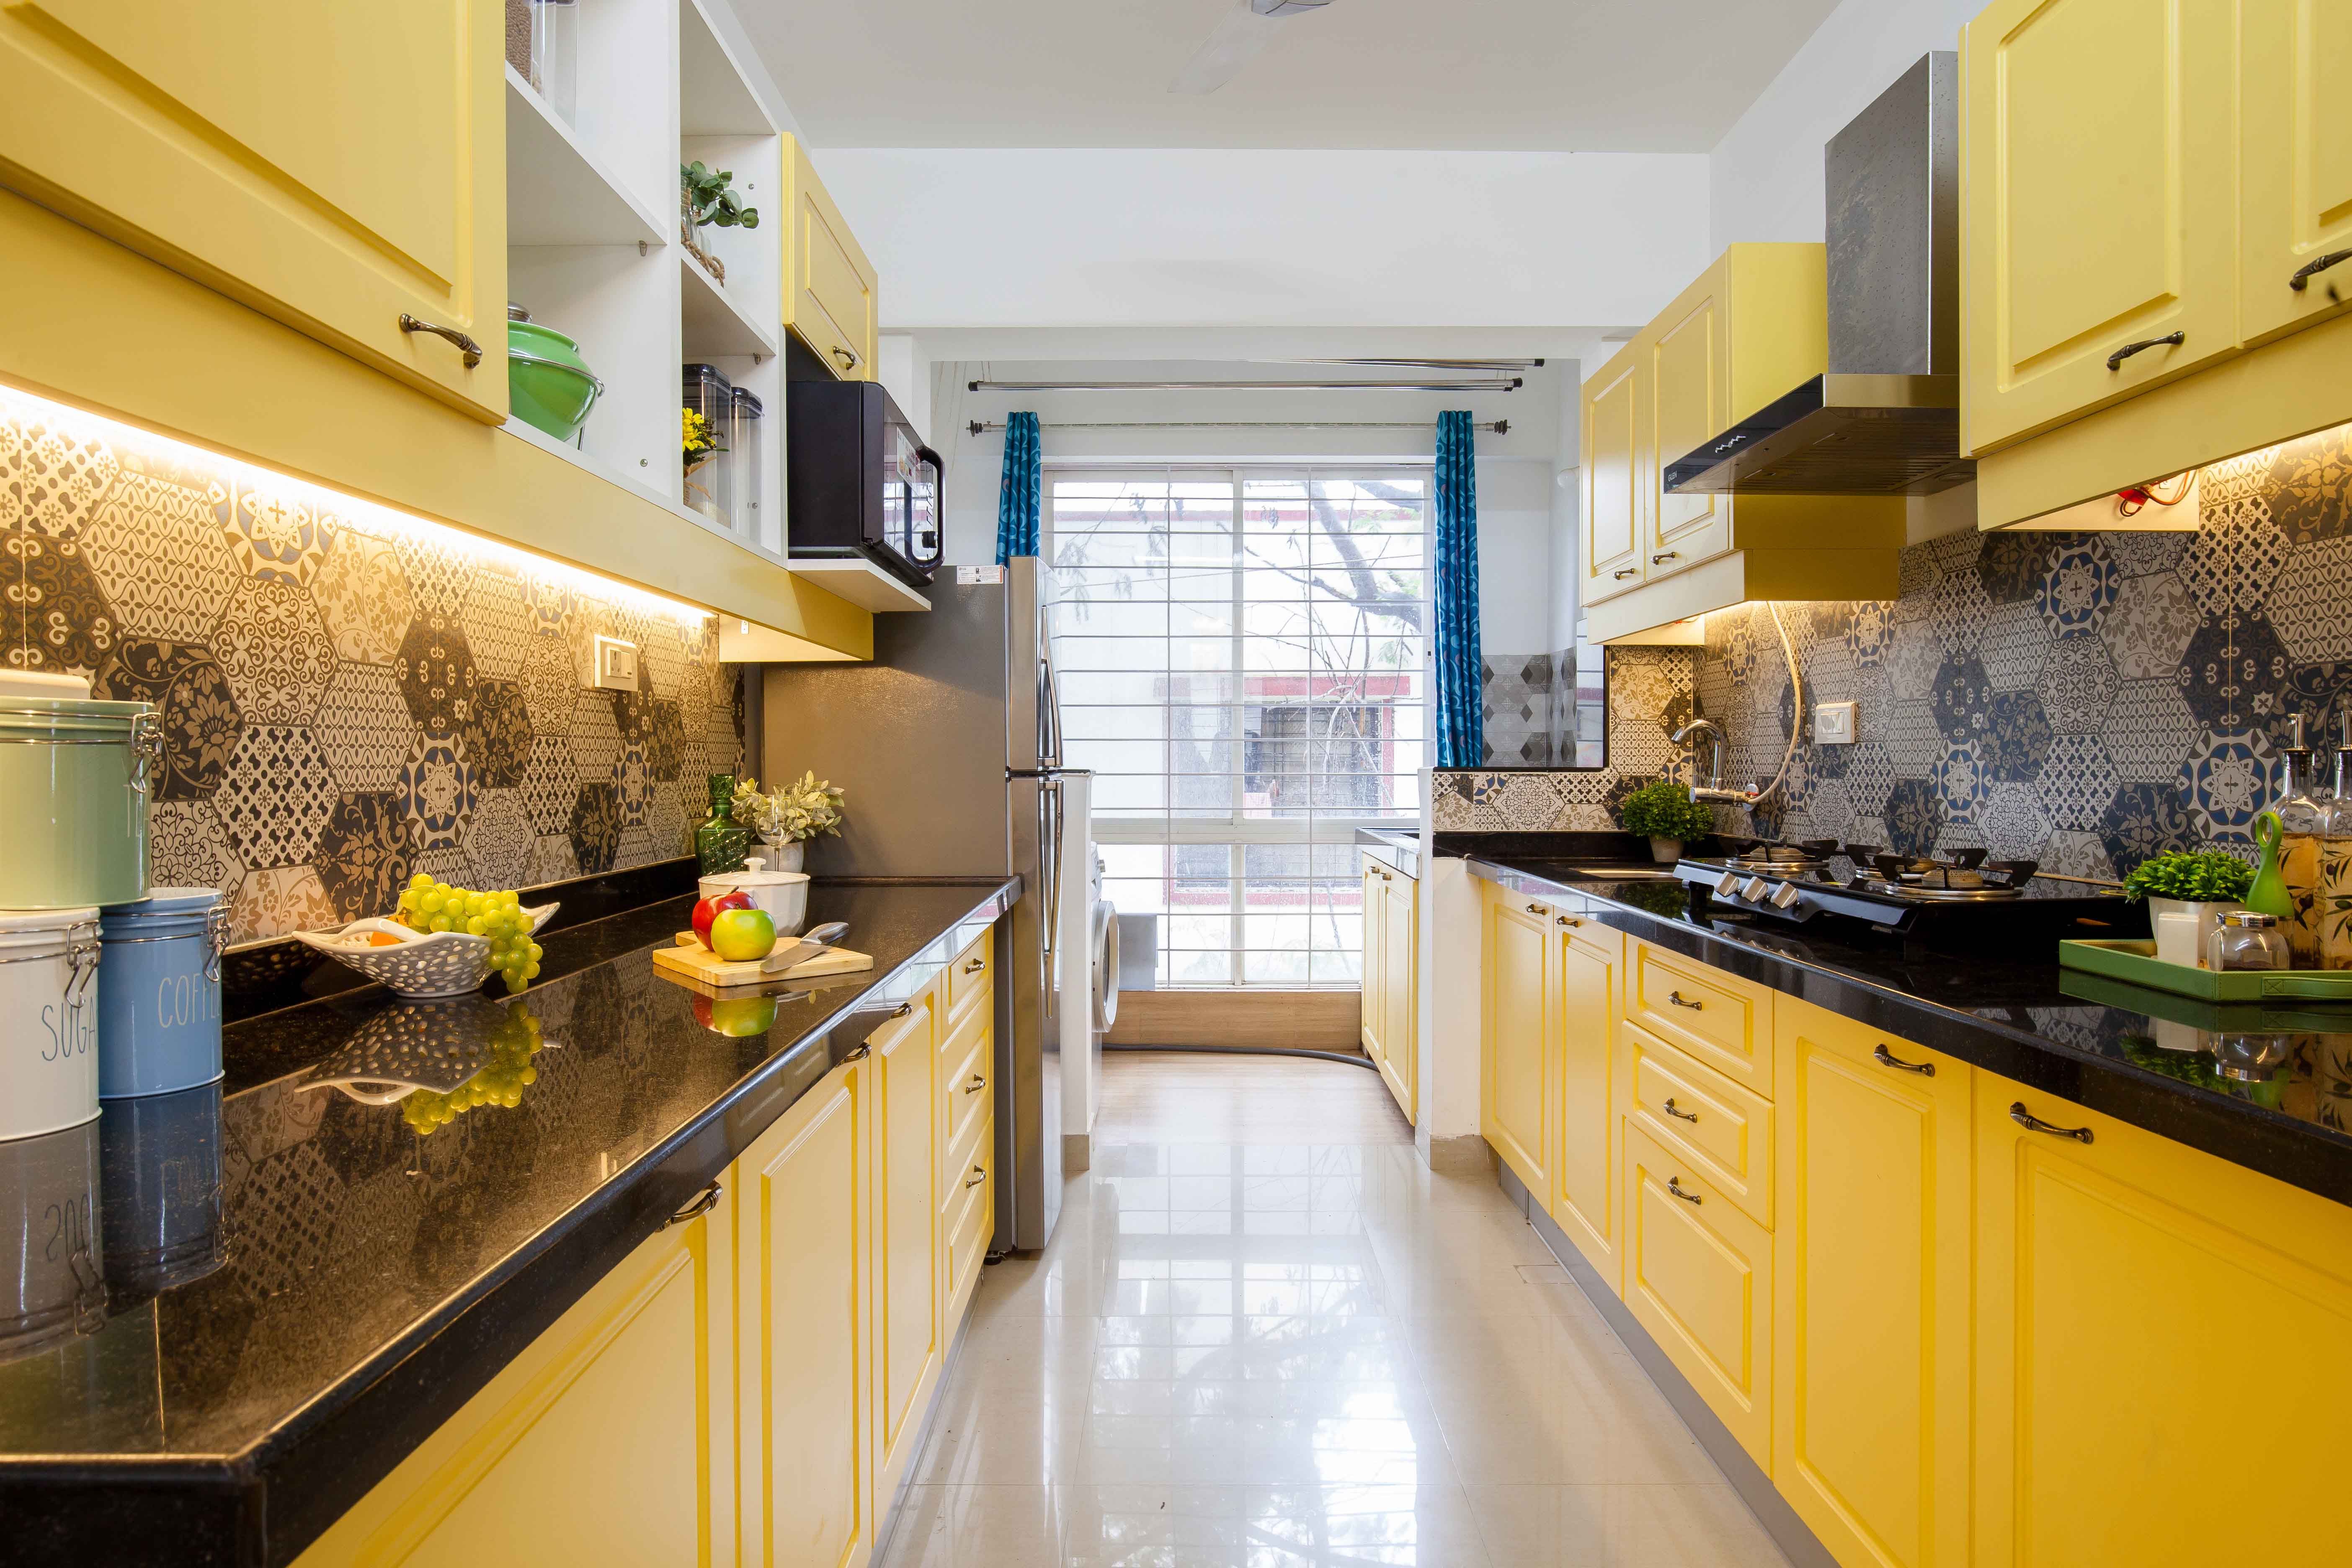 Classic Modular Parallel Kitchen Design With Yellow Cabinets